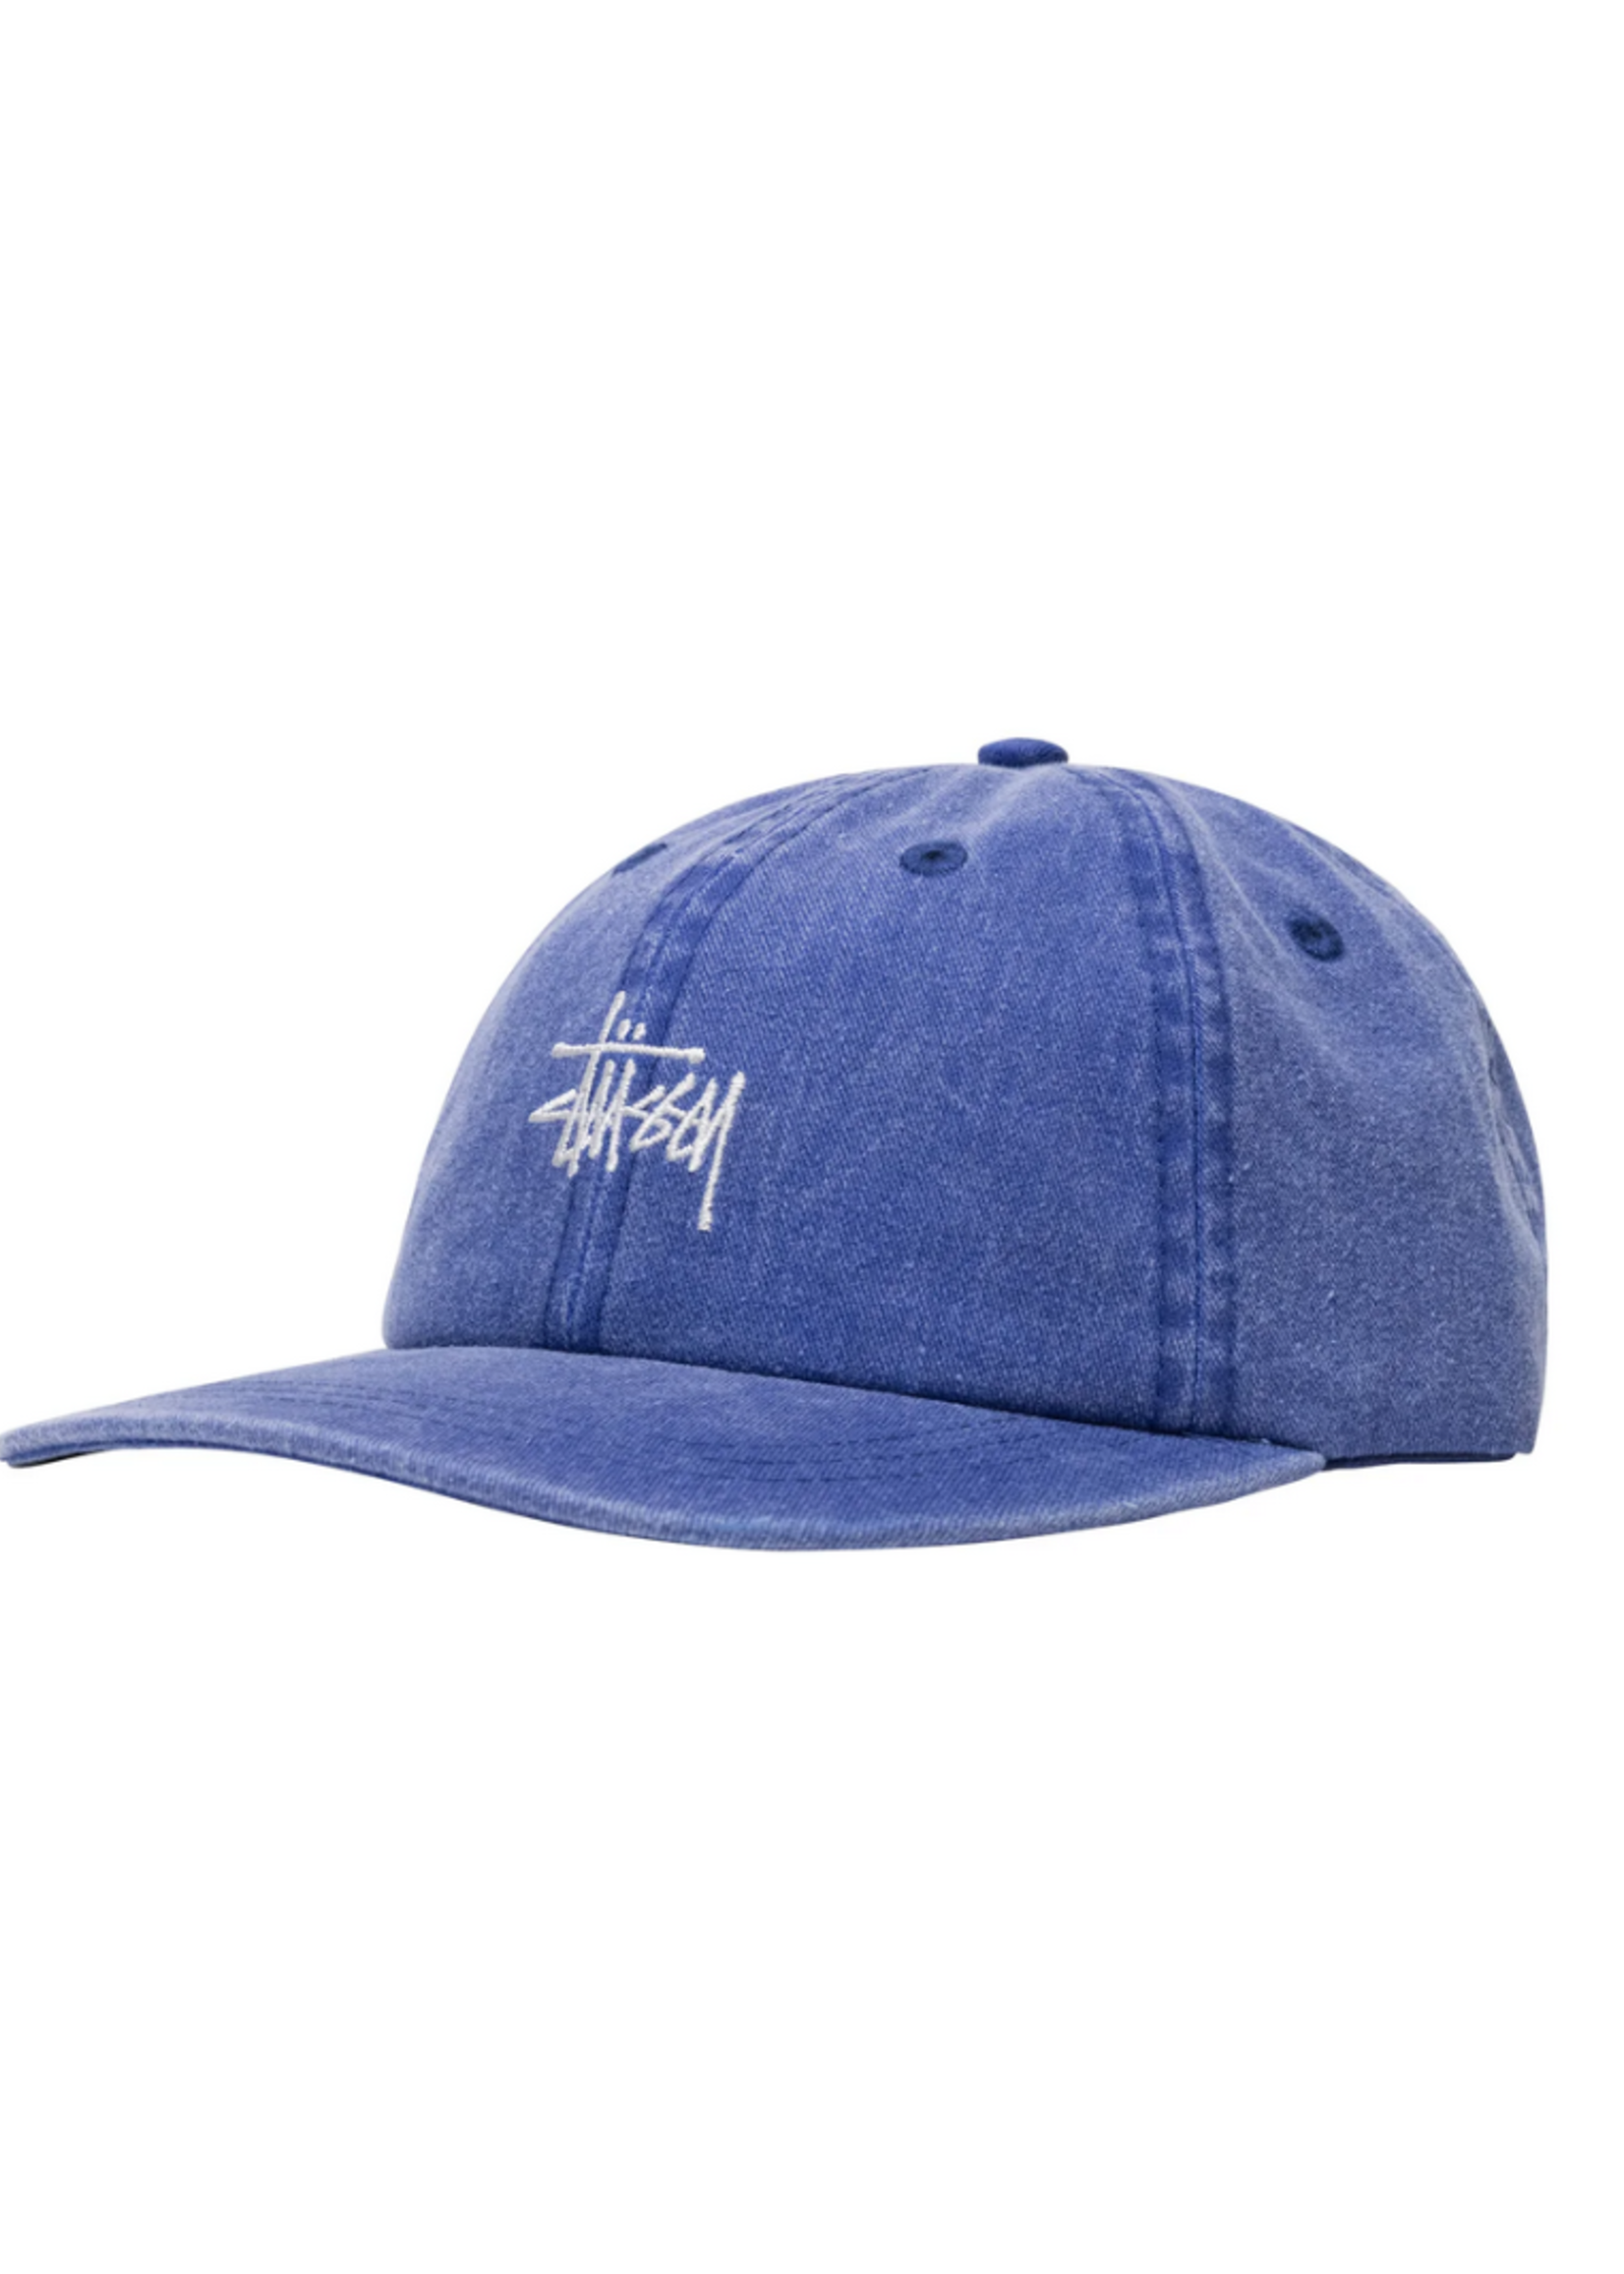 STUSSY WASHED STOCK LOW PRO CAP BLUE